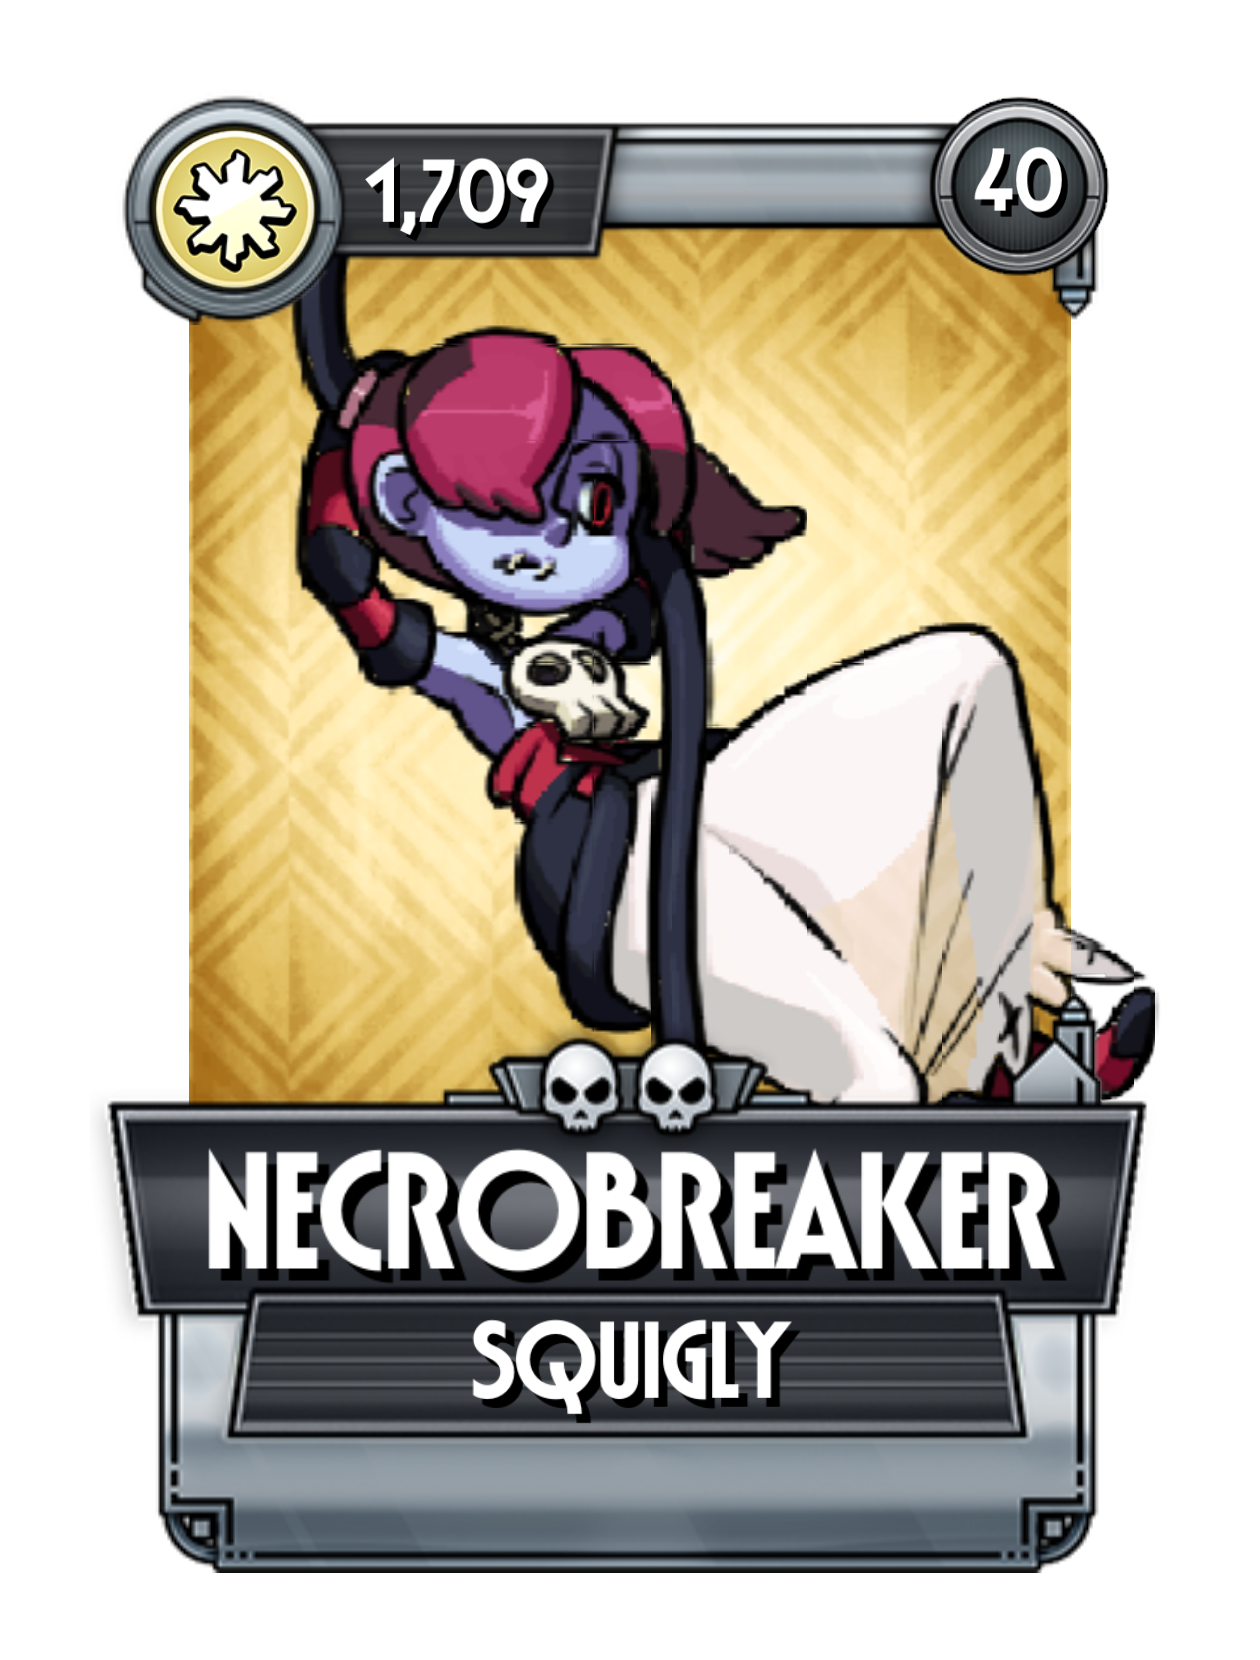 Skullgirls Mobile - Skullgirls Dev @AlmightyBonesLA is feeling festive -  he's giving away Event Relics from every SGM event! There's Necrobreakers  and Season 1 Passes for 2nd Encore up for grabs too!